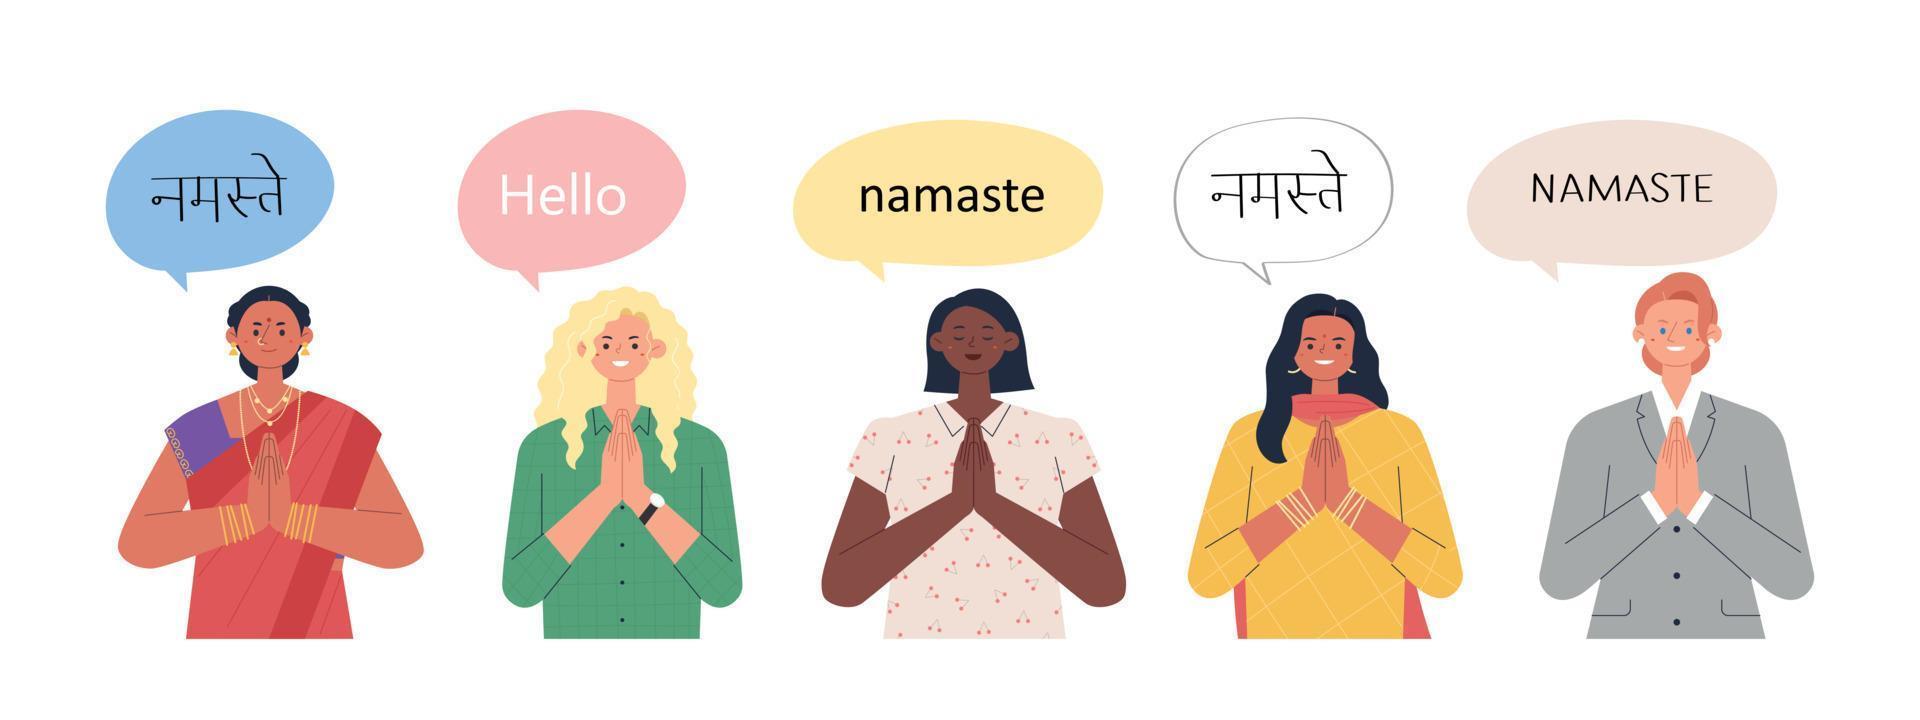 women of different races are holding hands and saying an Indian greeting. flat design style vector illustration